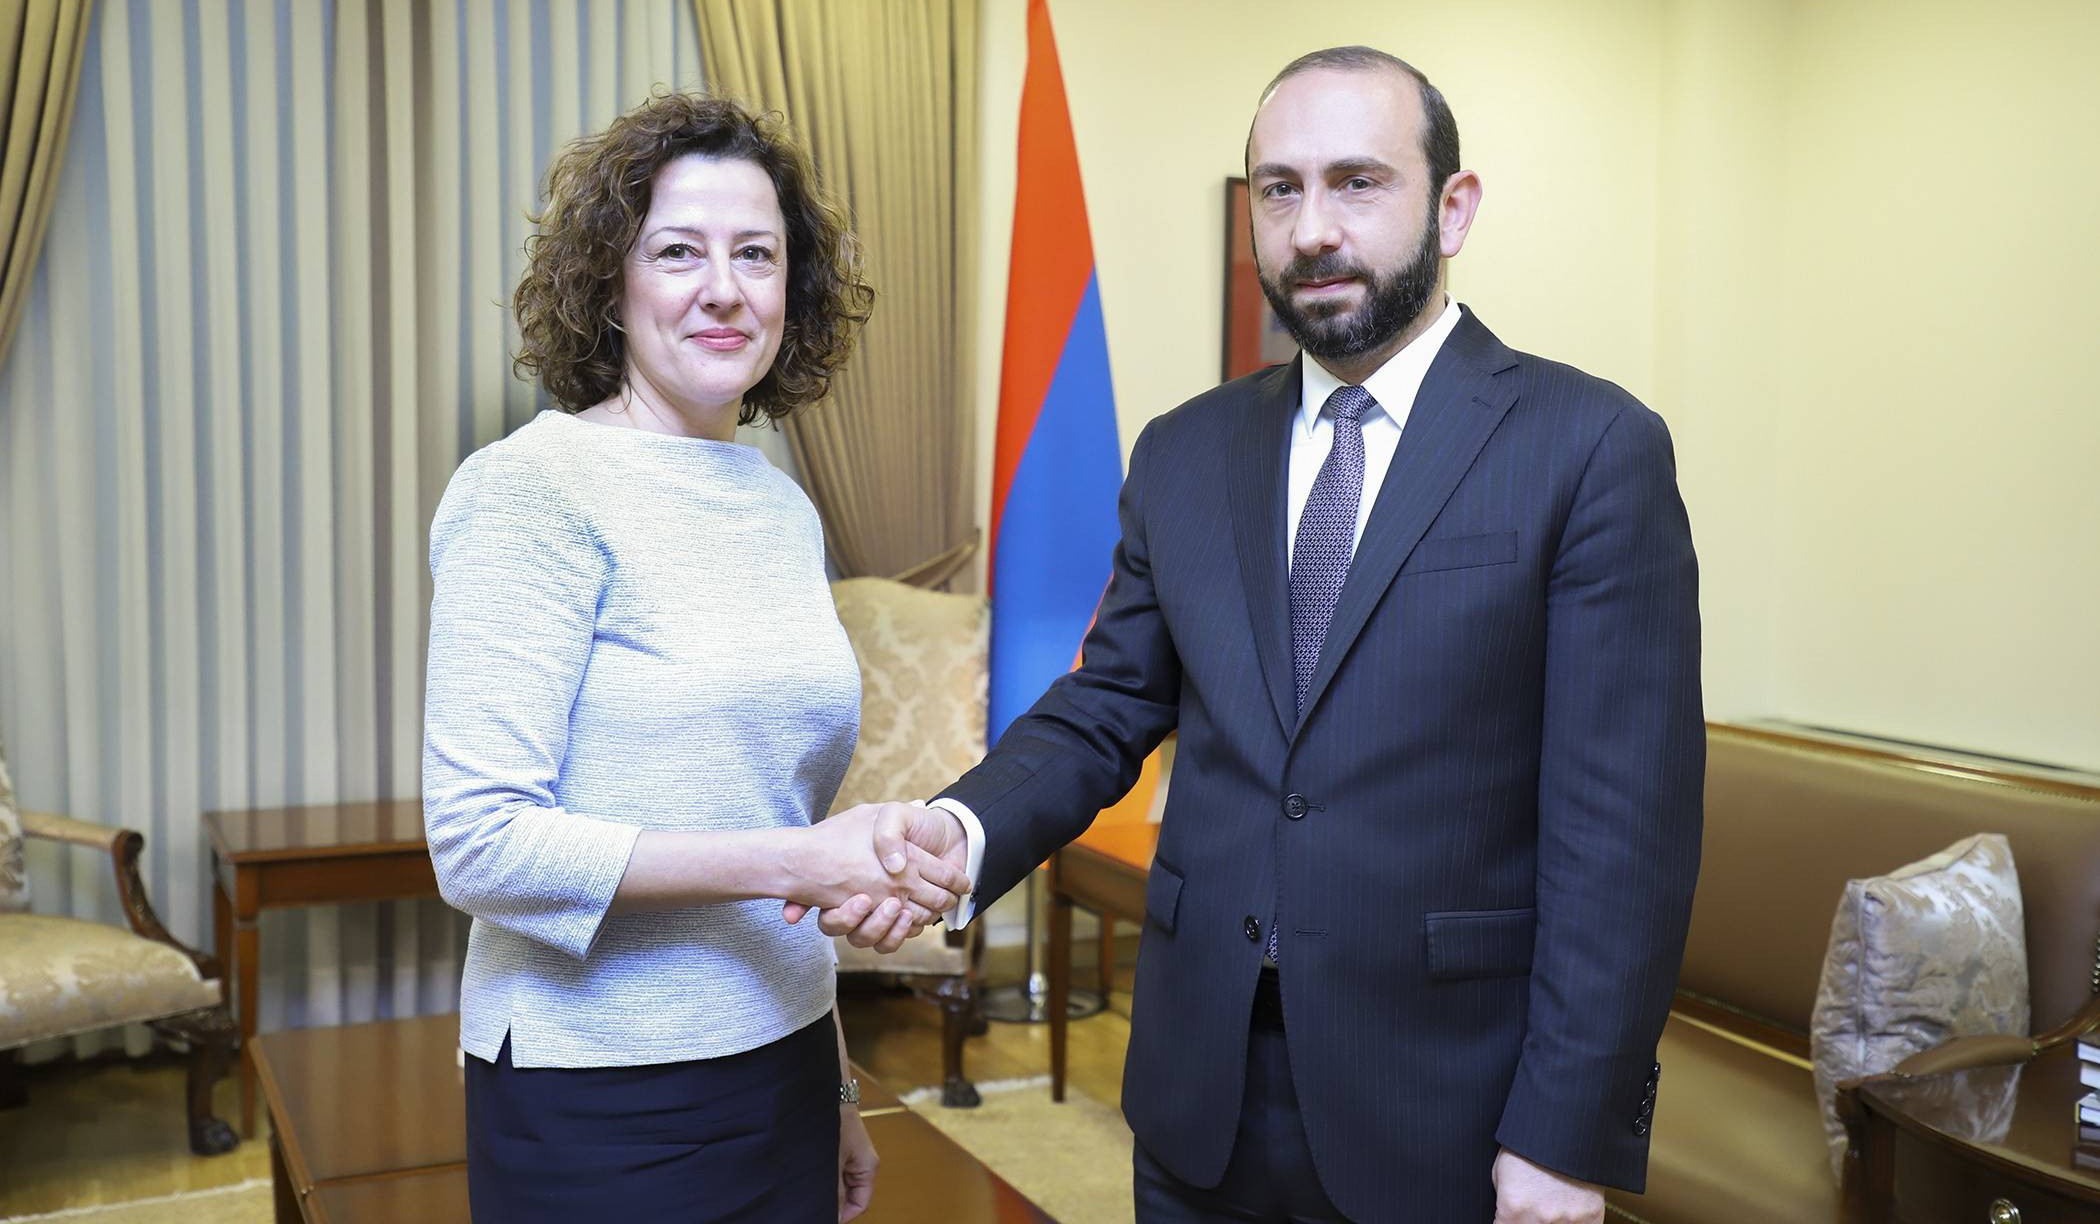 Armenian Foreign Minister and Bulgarian Deputy Foreign Minister discuss issues related to cooperation in economic and cultural spheres